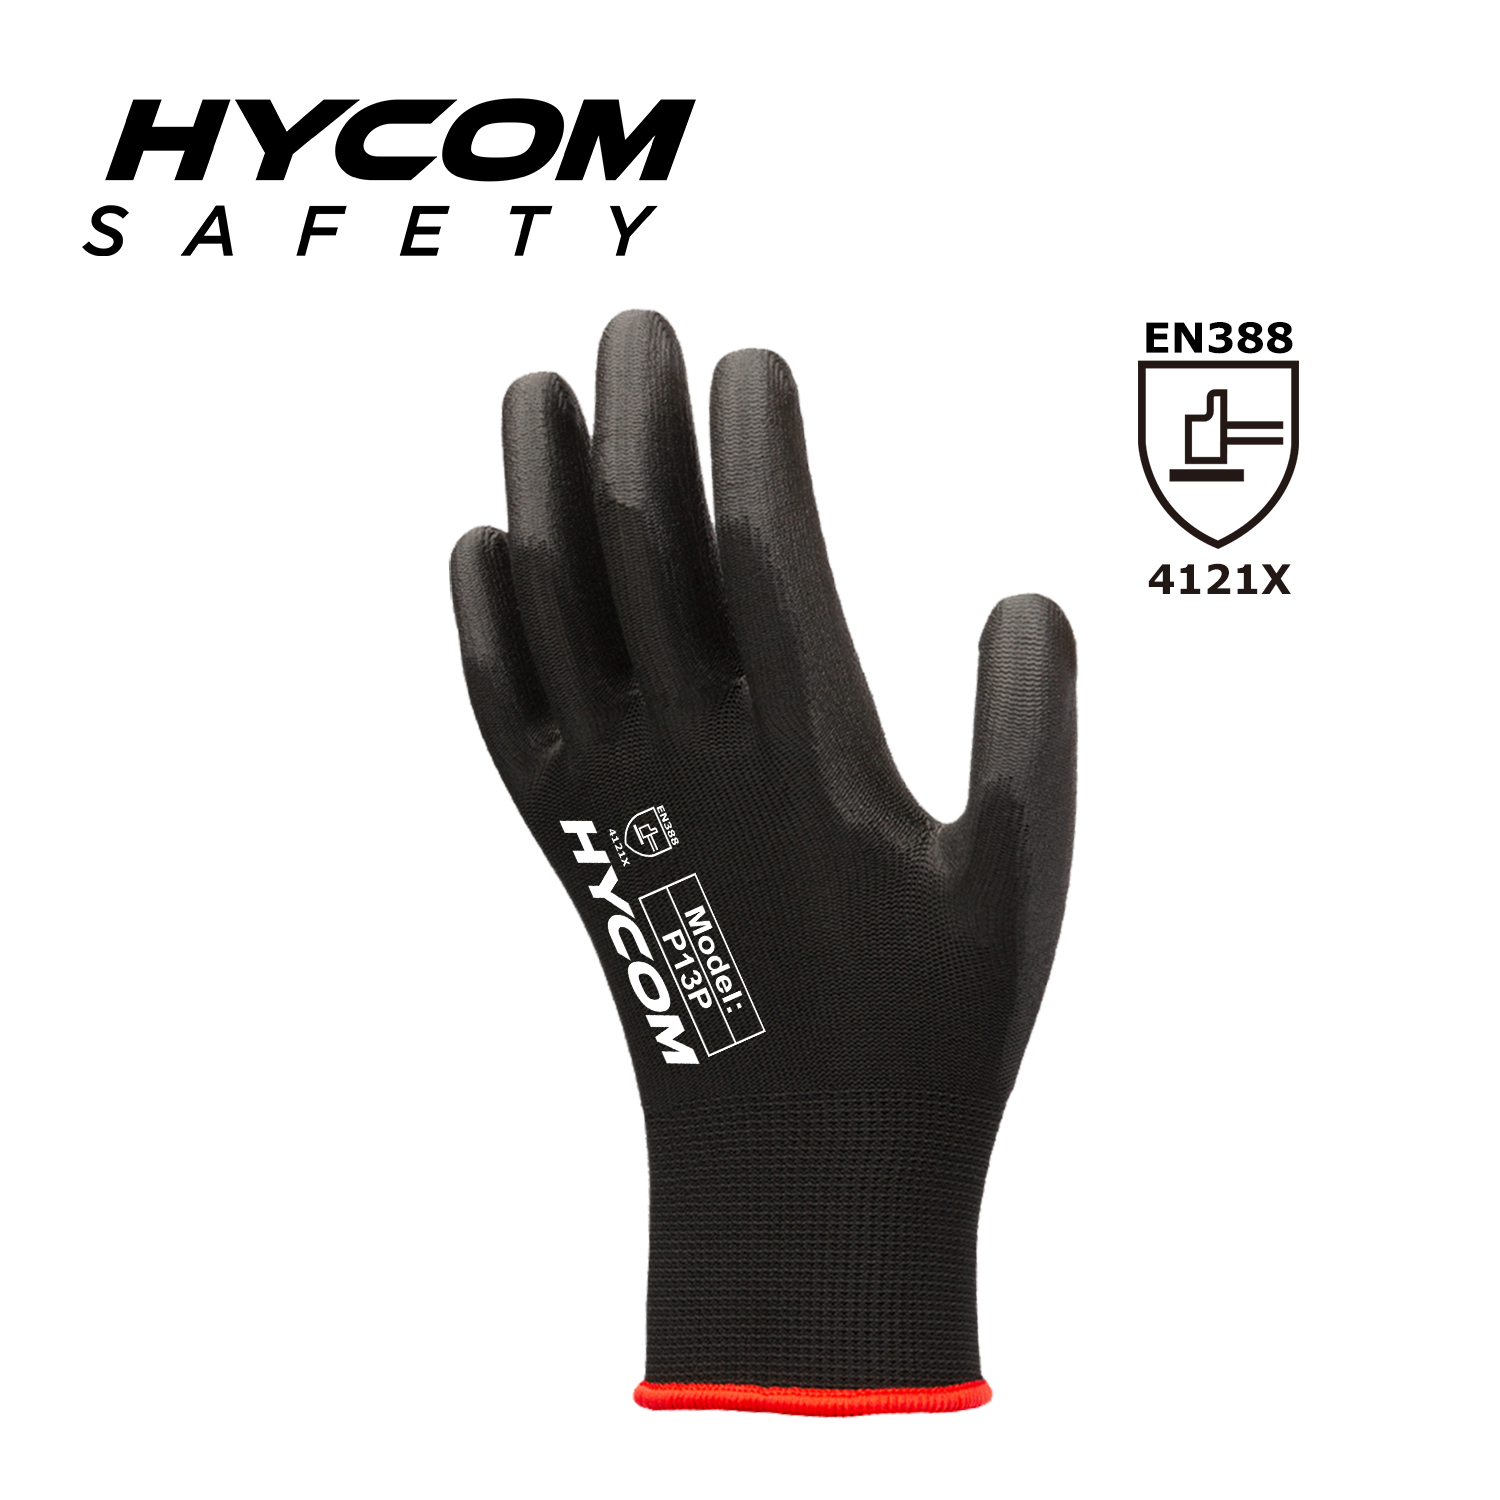 HYCOM 13G Polyester PU Coated Safety Glove with Palm Polyurethane Coating Cut Resistant Glove